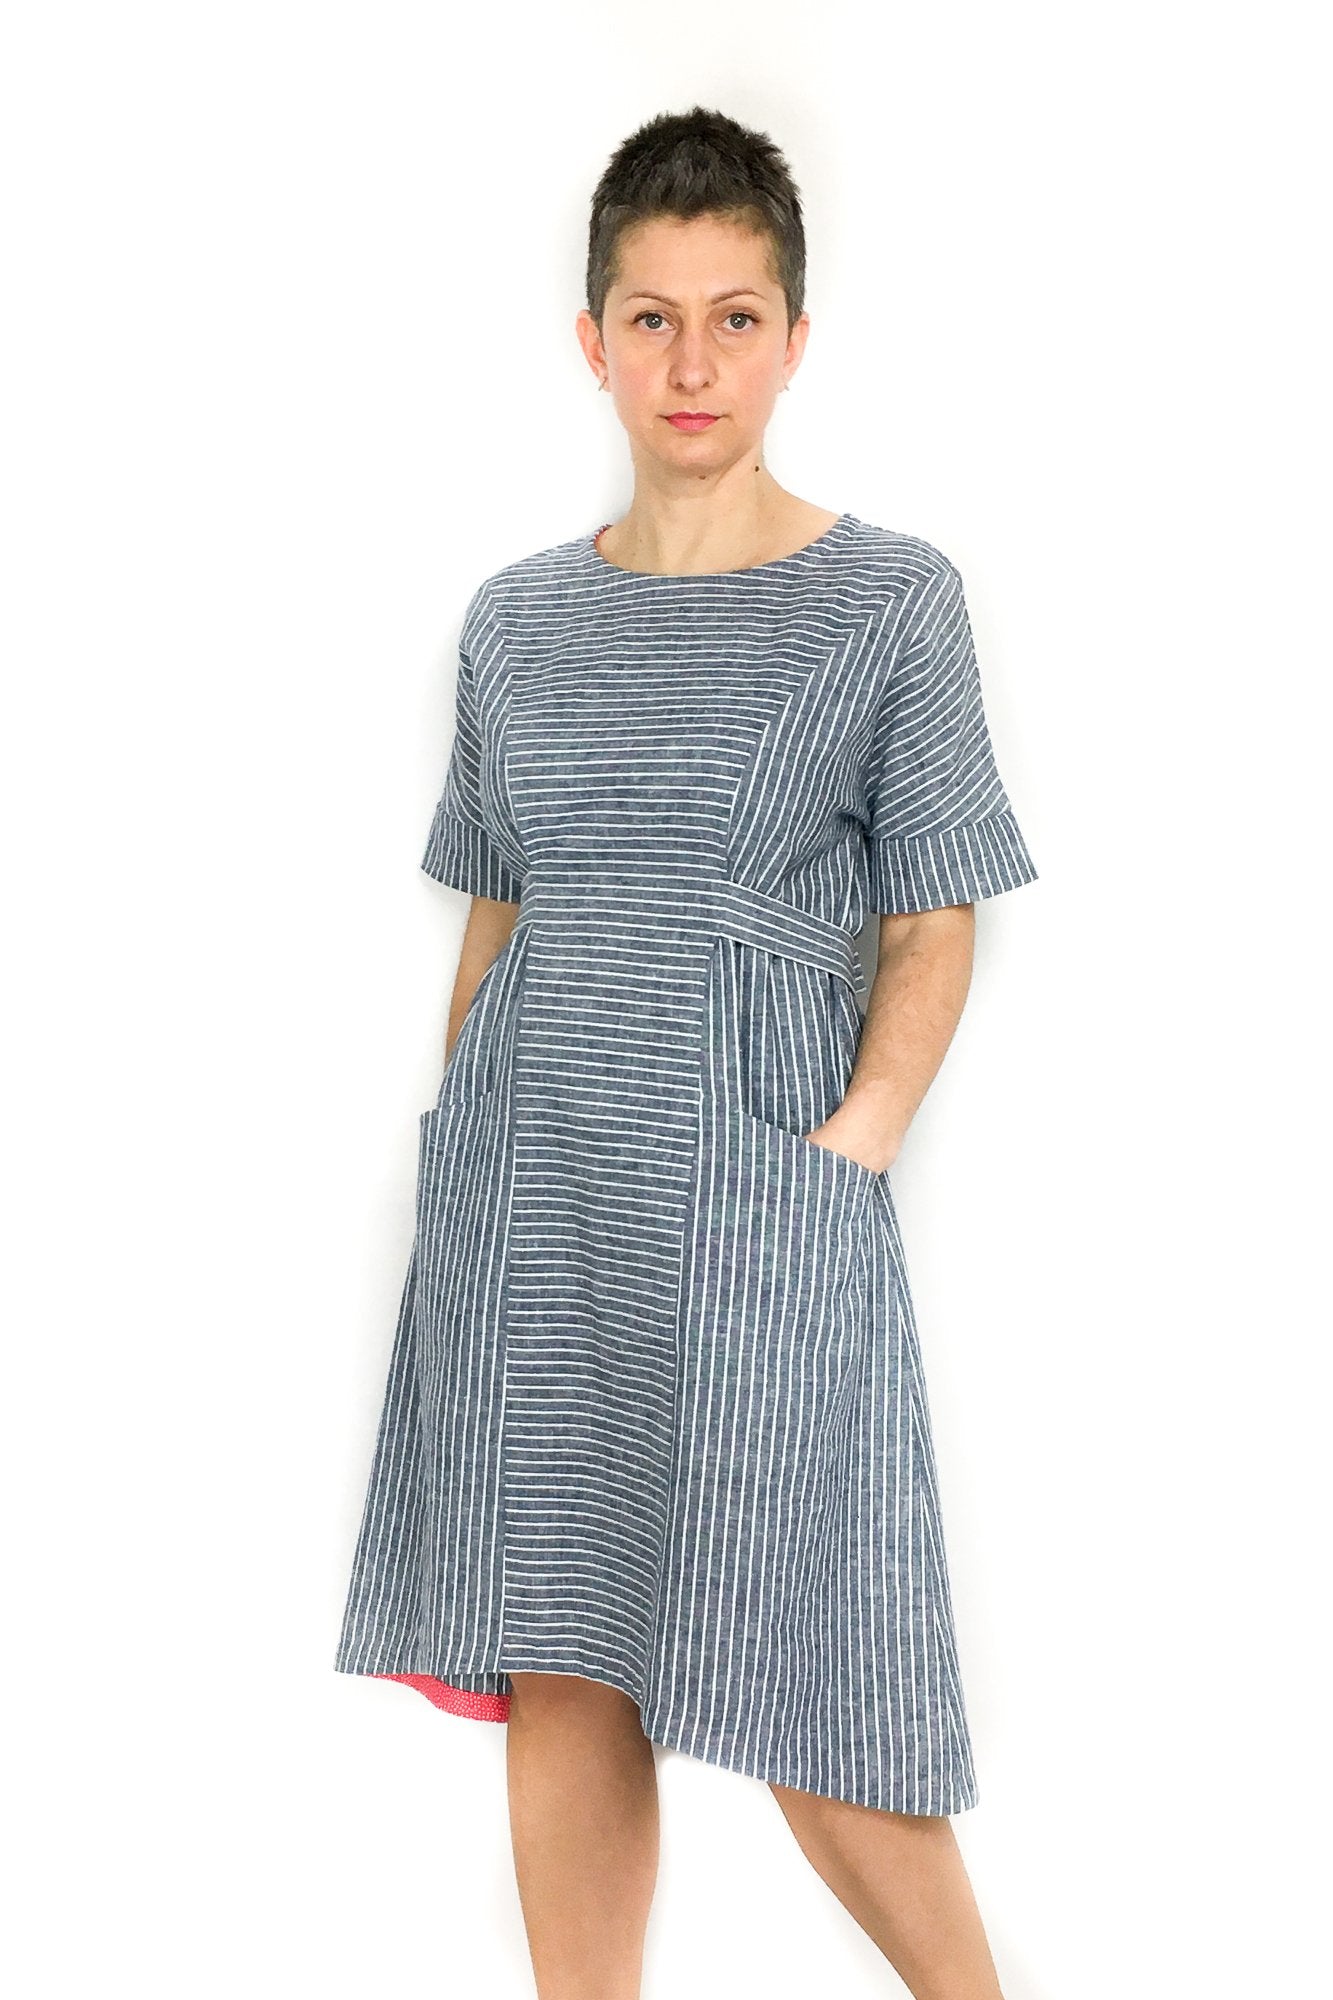 Woman wearing the Jasmine Dress sewing pattern by Dhurata Davies Patterns. A dress pattern made in any light/medium weight woven fabric with some drape, featuring a short sleeve with wide cuff, angled pockets, waist ties and a hem that is slightly raised 